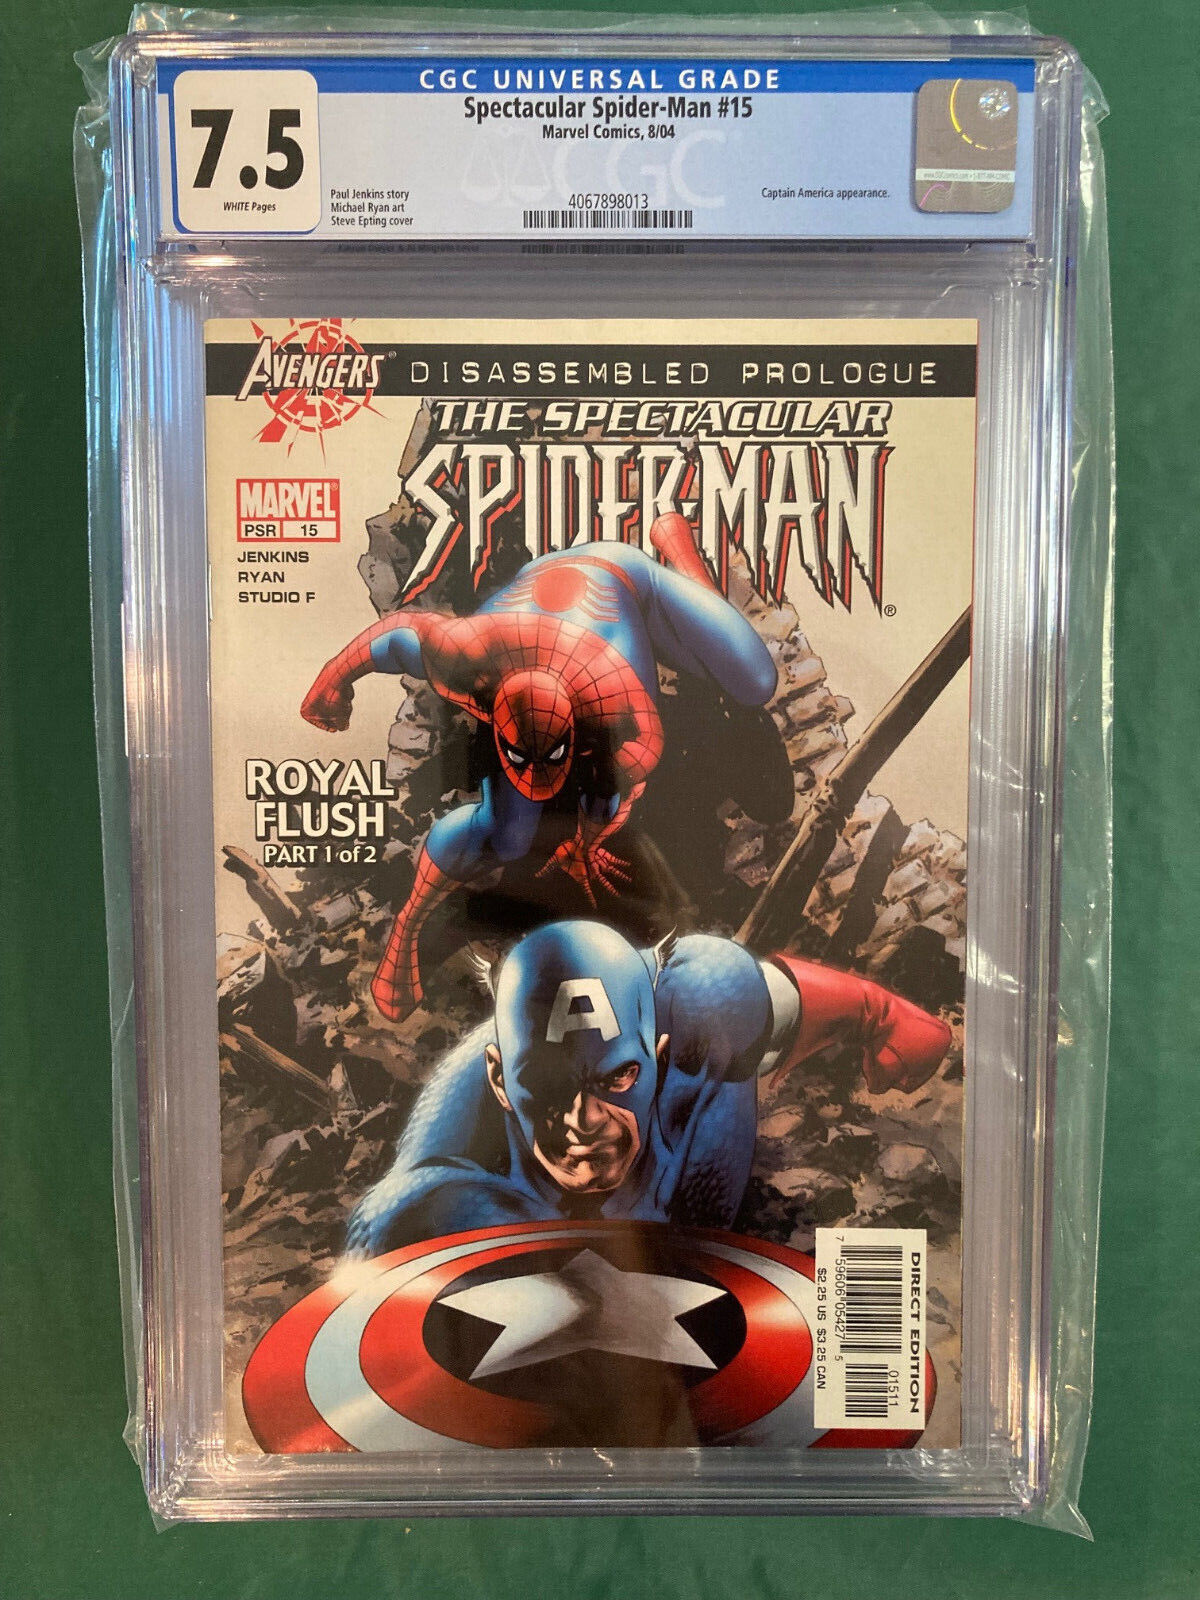 SPECTACULAR SPIDER-MAN #15 CGC 7.5 WP 1st App Queen Avengers Disassembled 2004